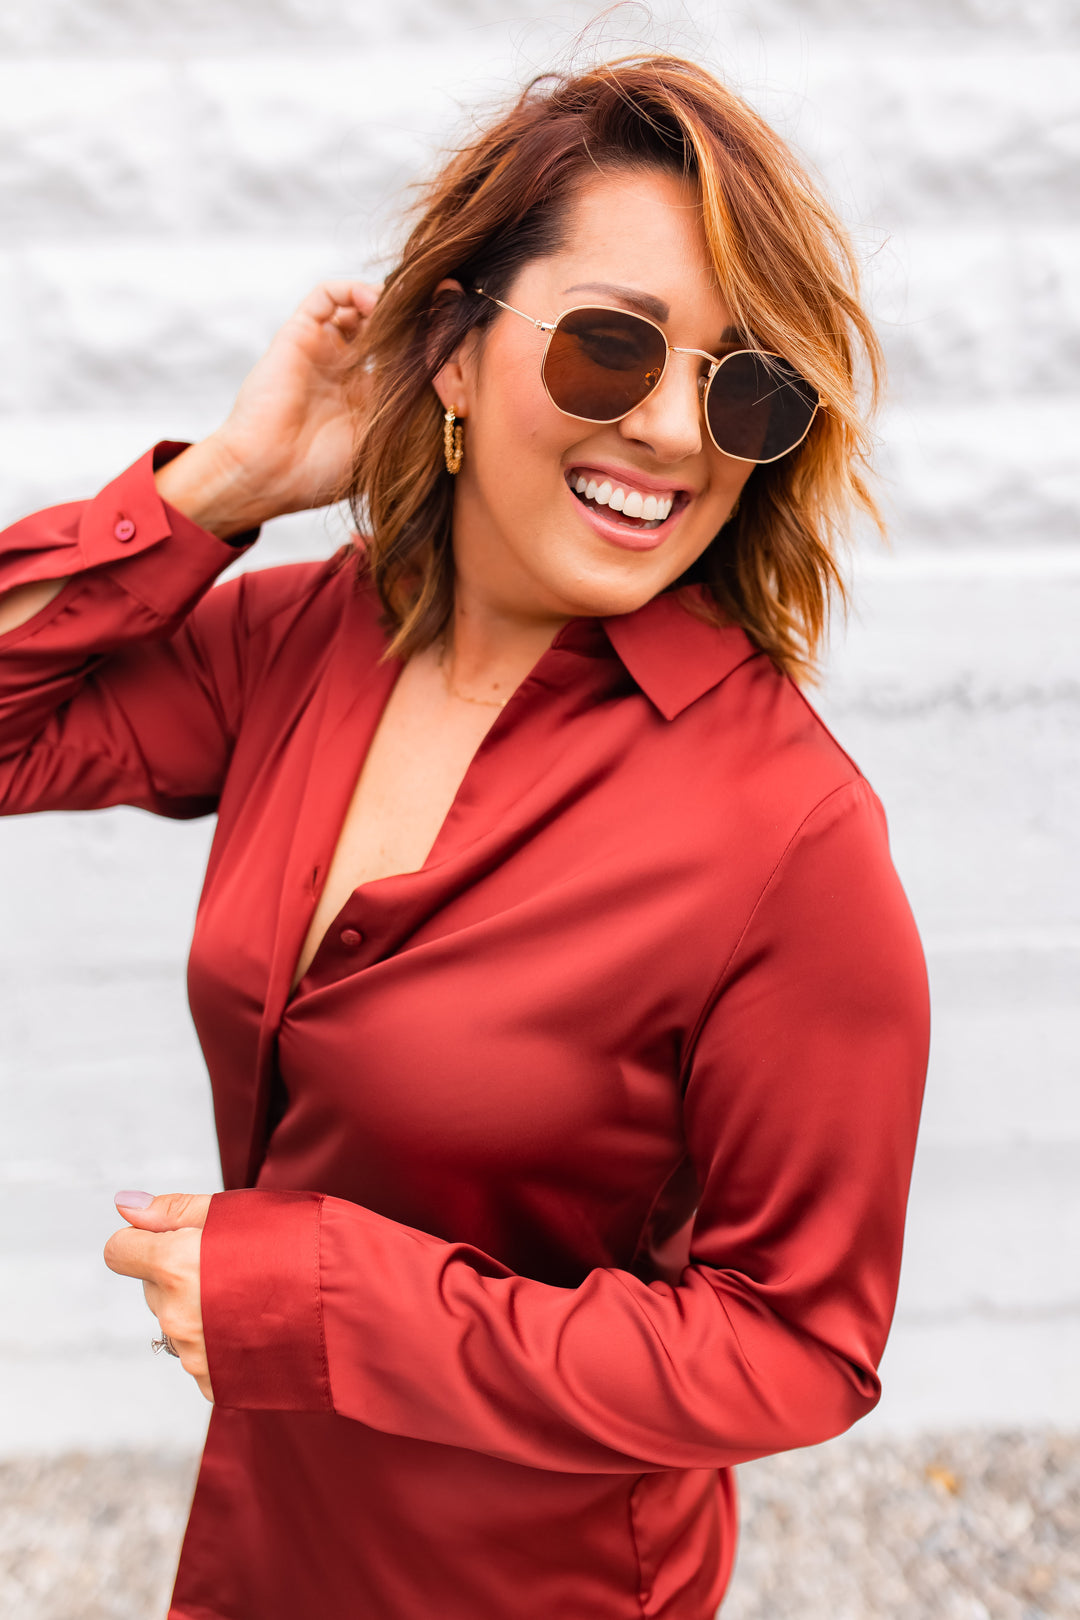 The Sophisticated Sass Top - Burnt Cinnamon